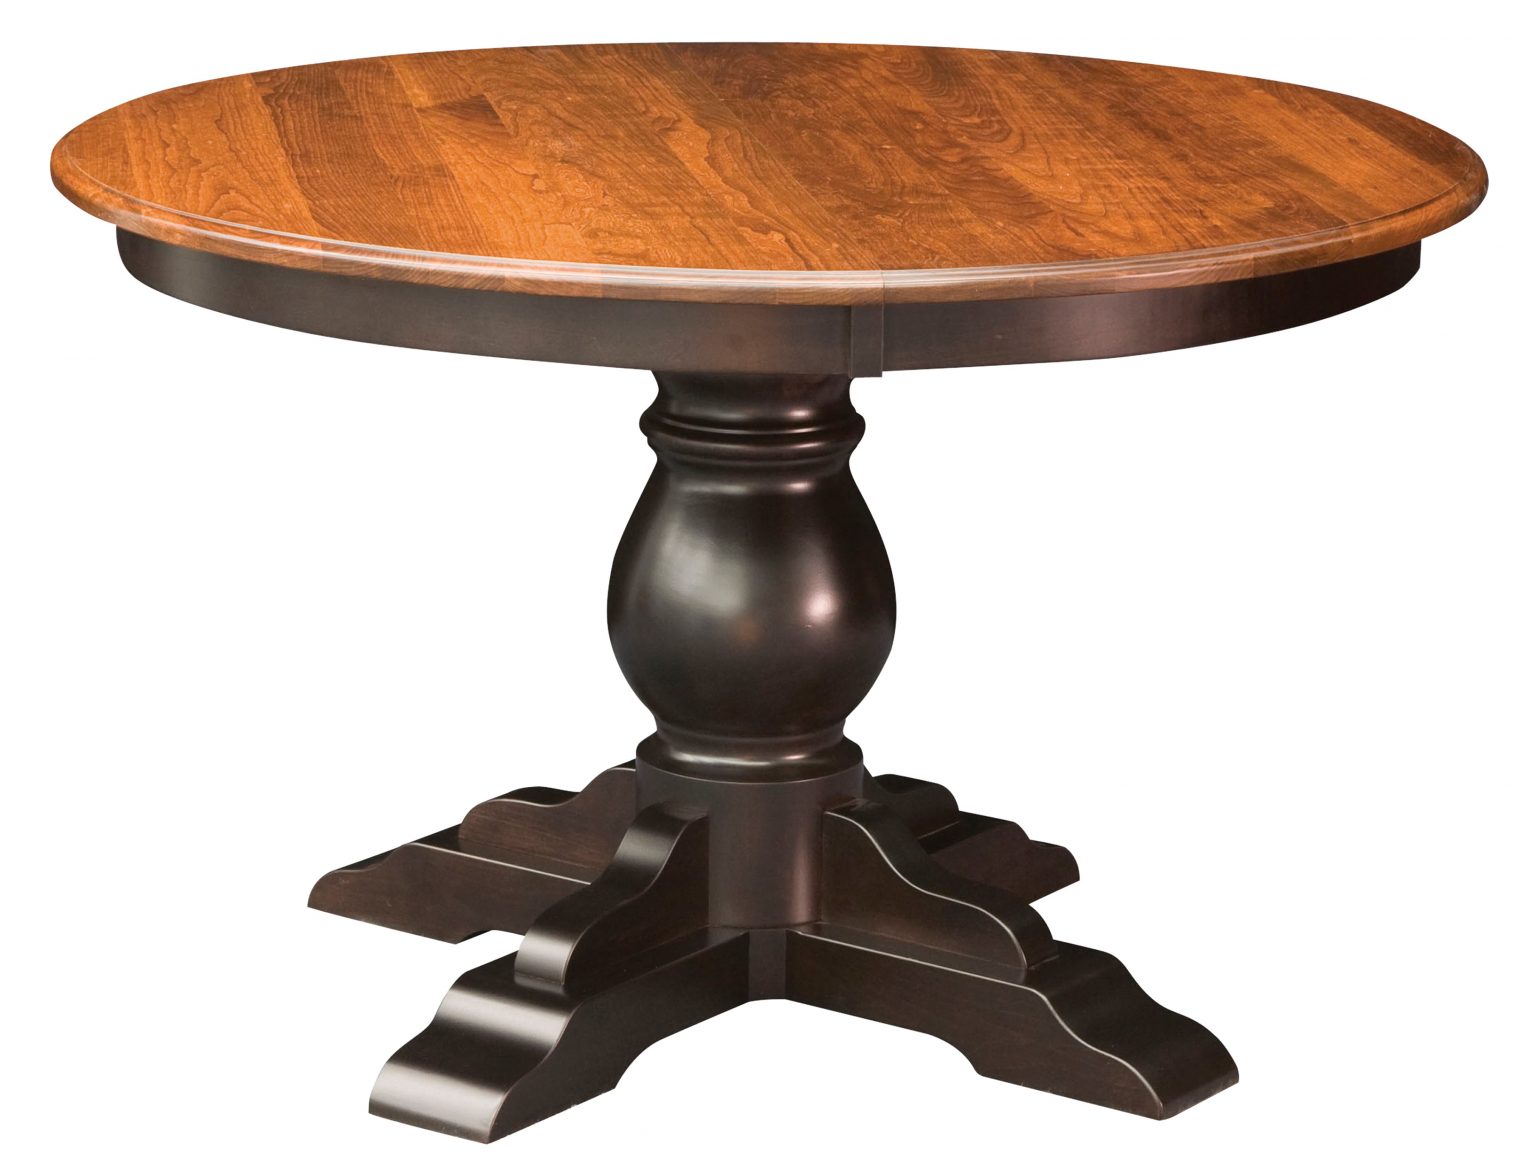 48 inch round kitchen table with mission style pedistal